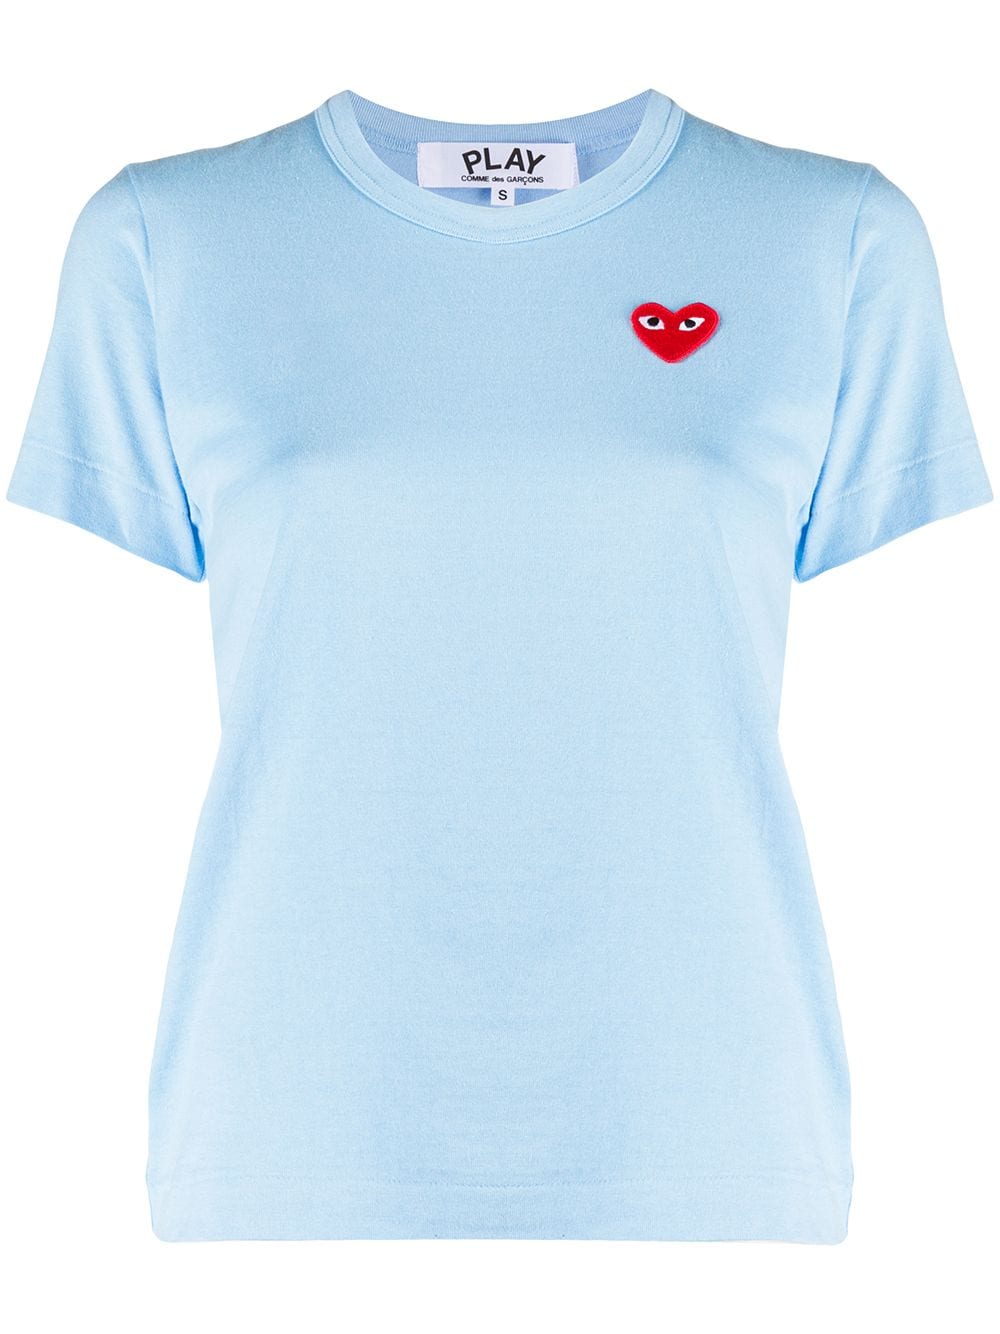 Cdg play red heart short sleeve t-s 1